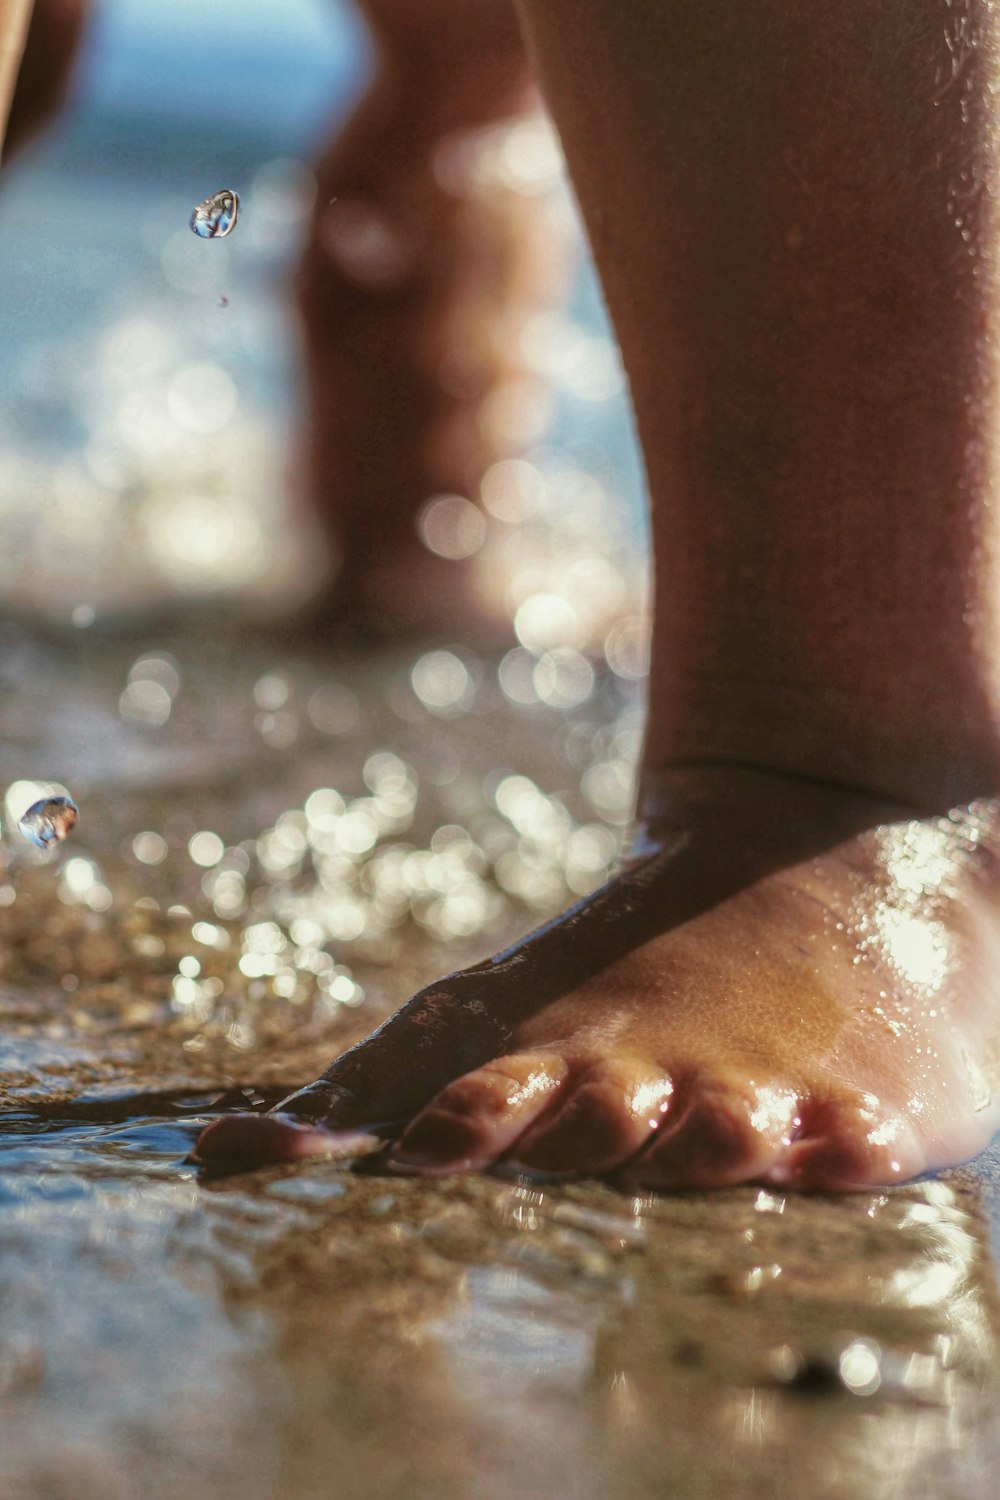 persons feet with water droplets